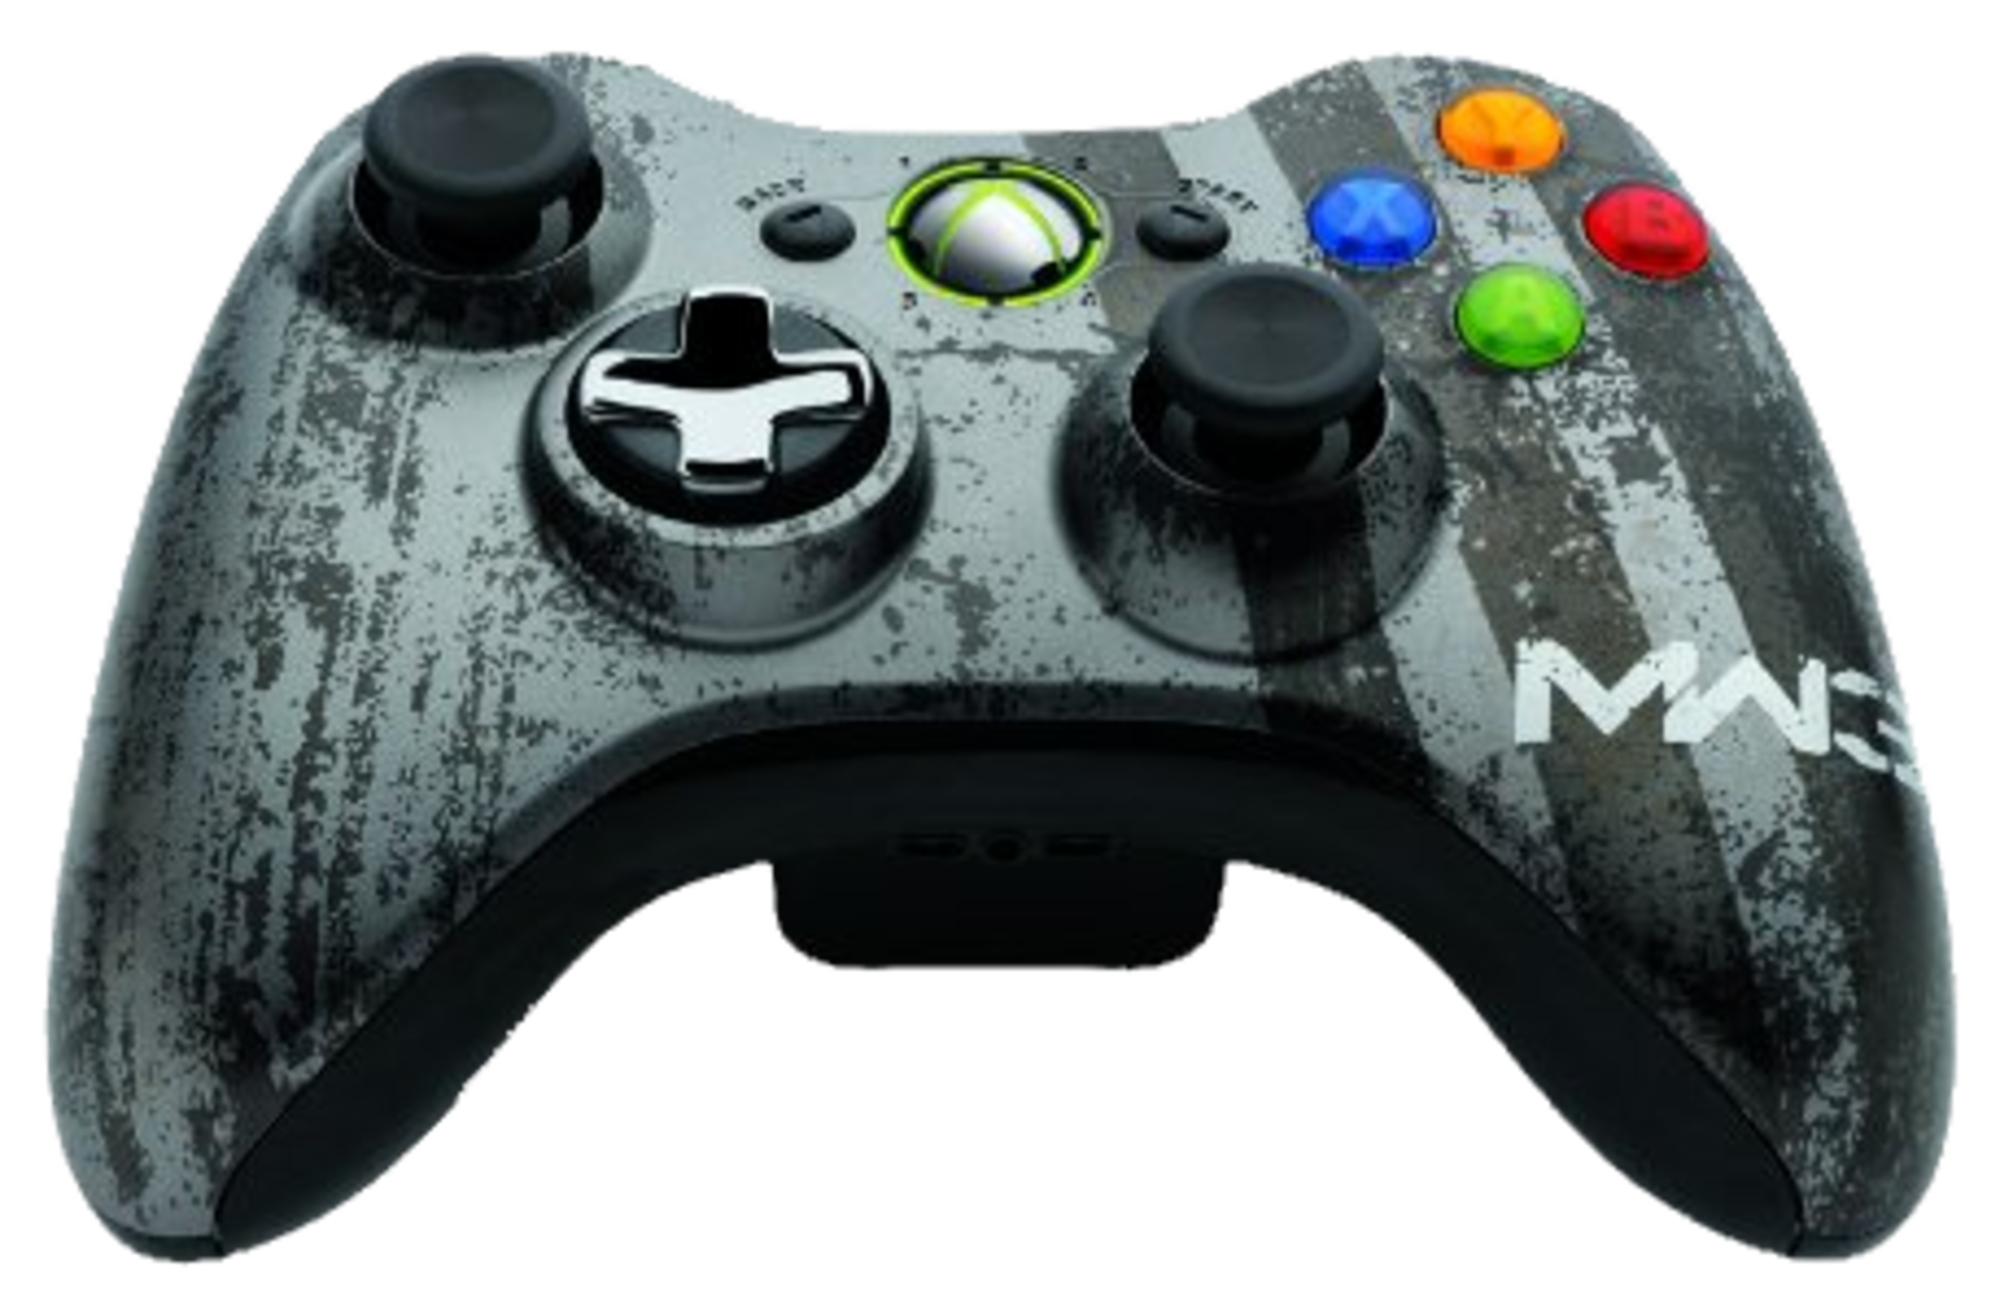 call of duty 4 pc xbox controller